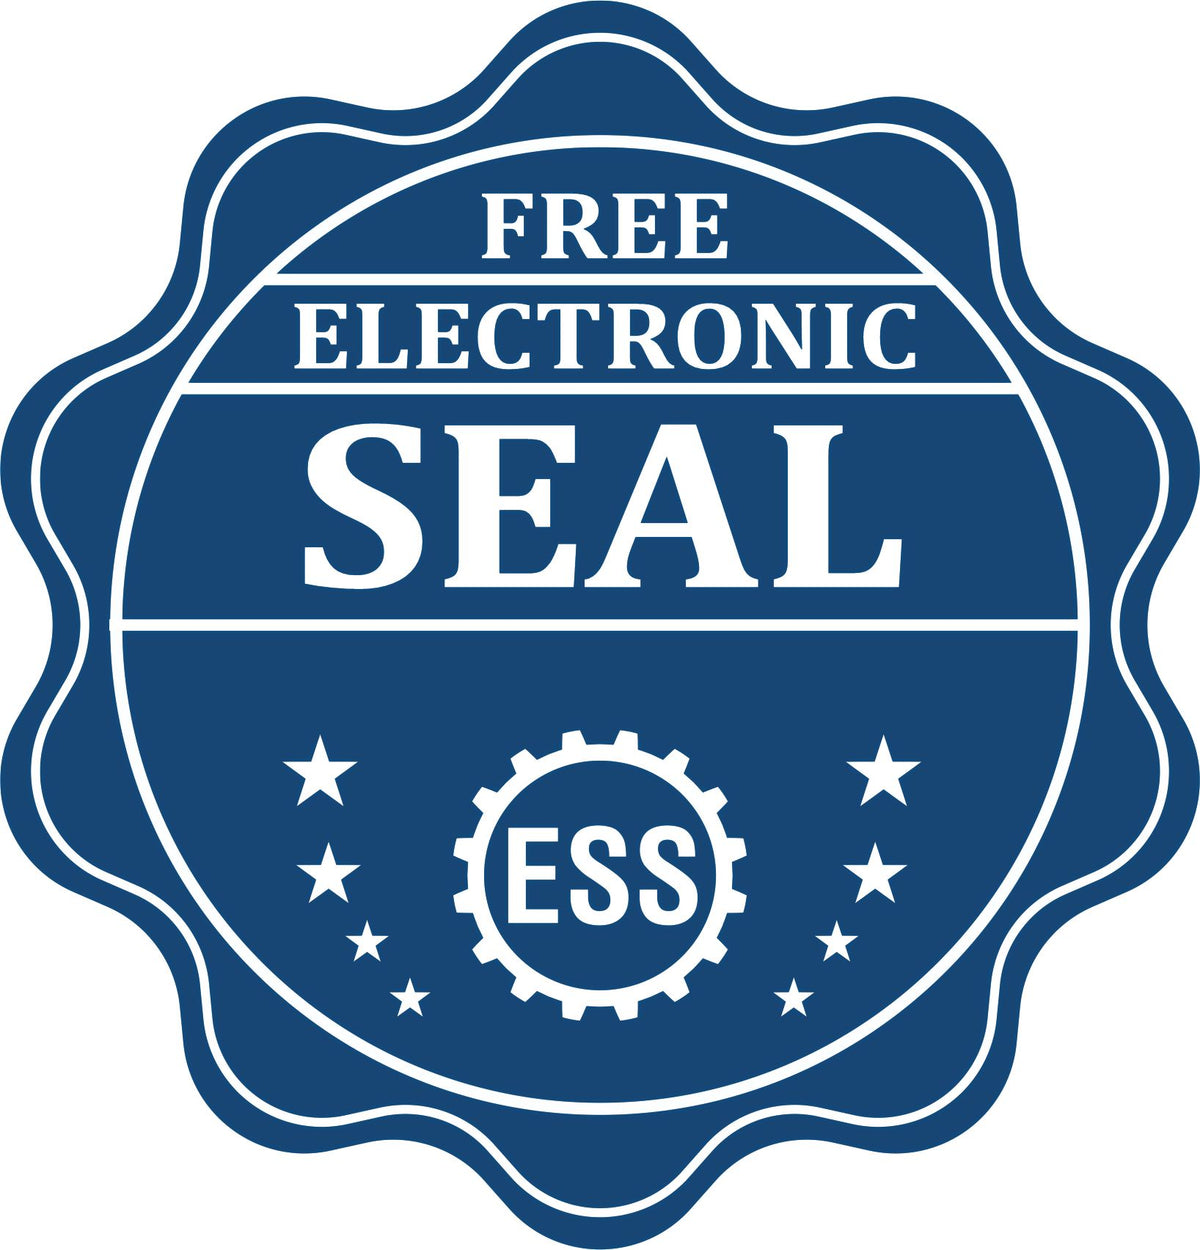 A badge showing a free electronic seal for the Soft Mississippi Professional Engineer Seal with stars and the ESS gear on the emblem.